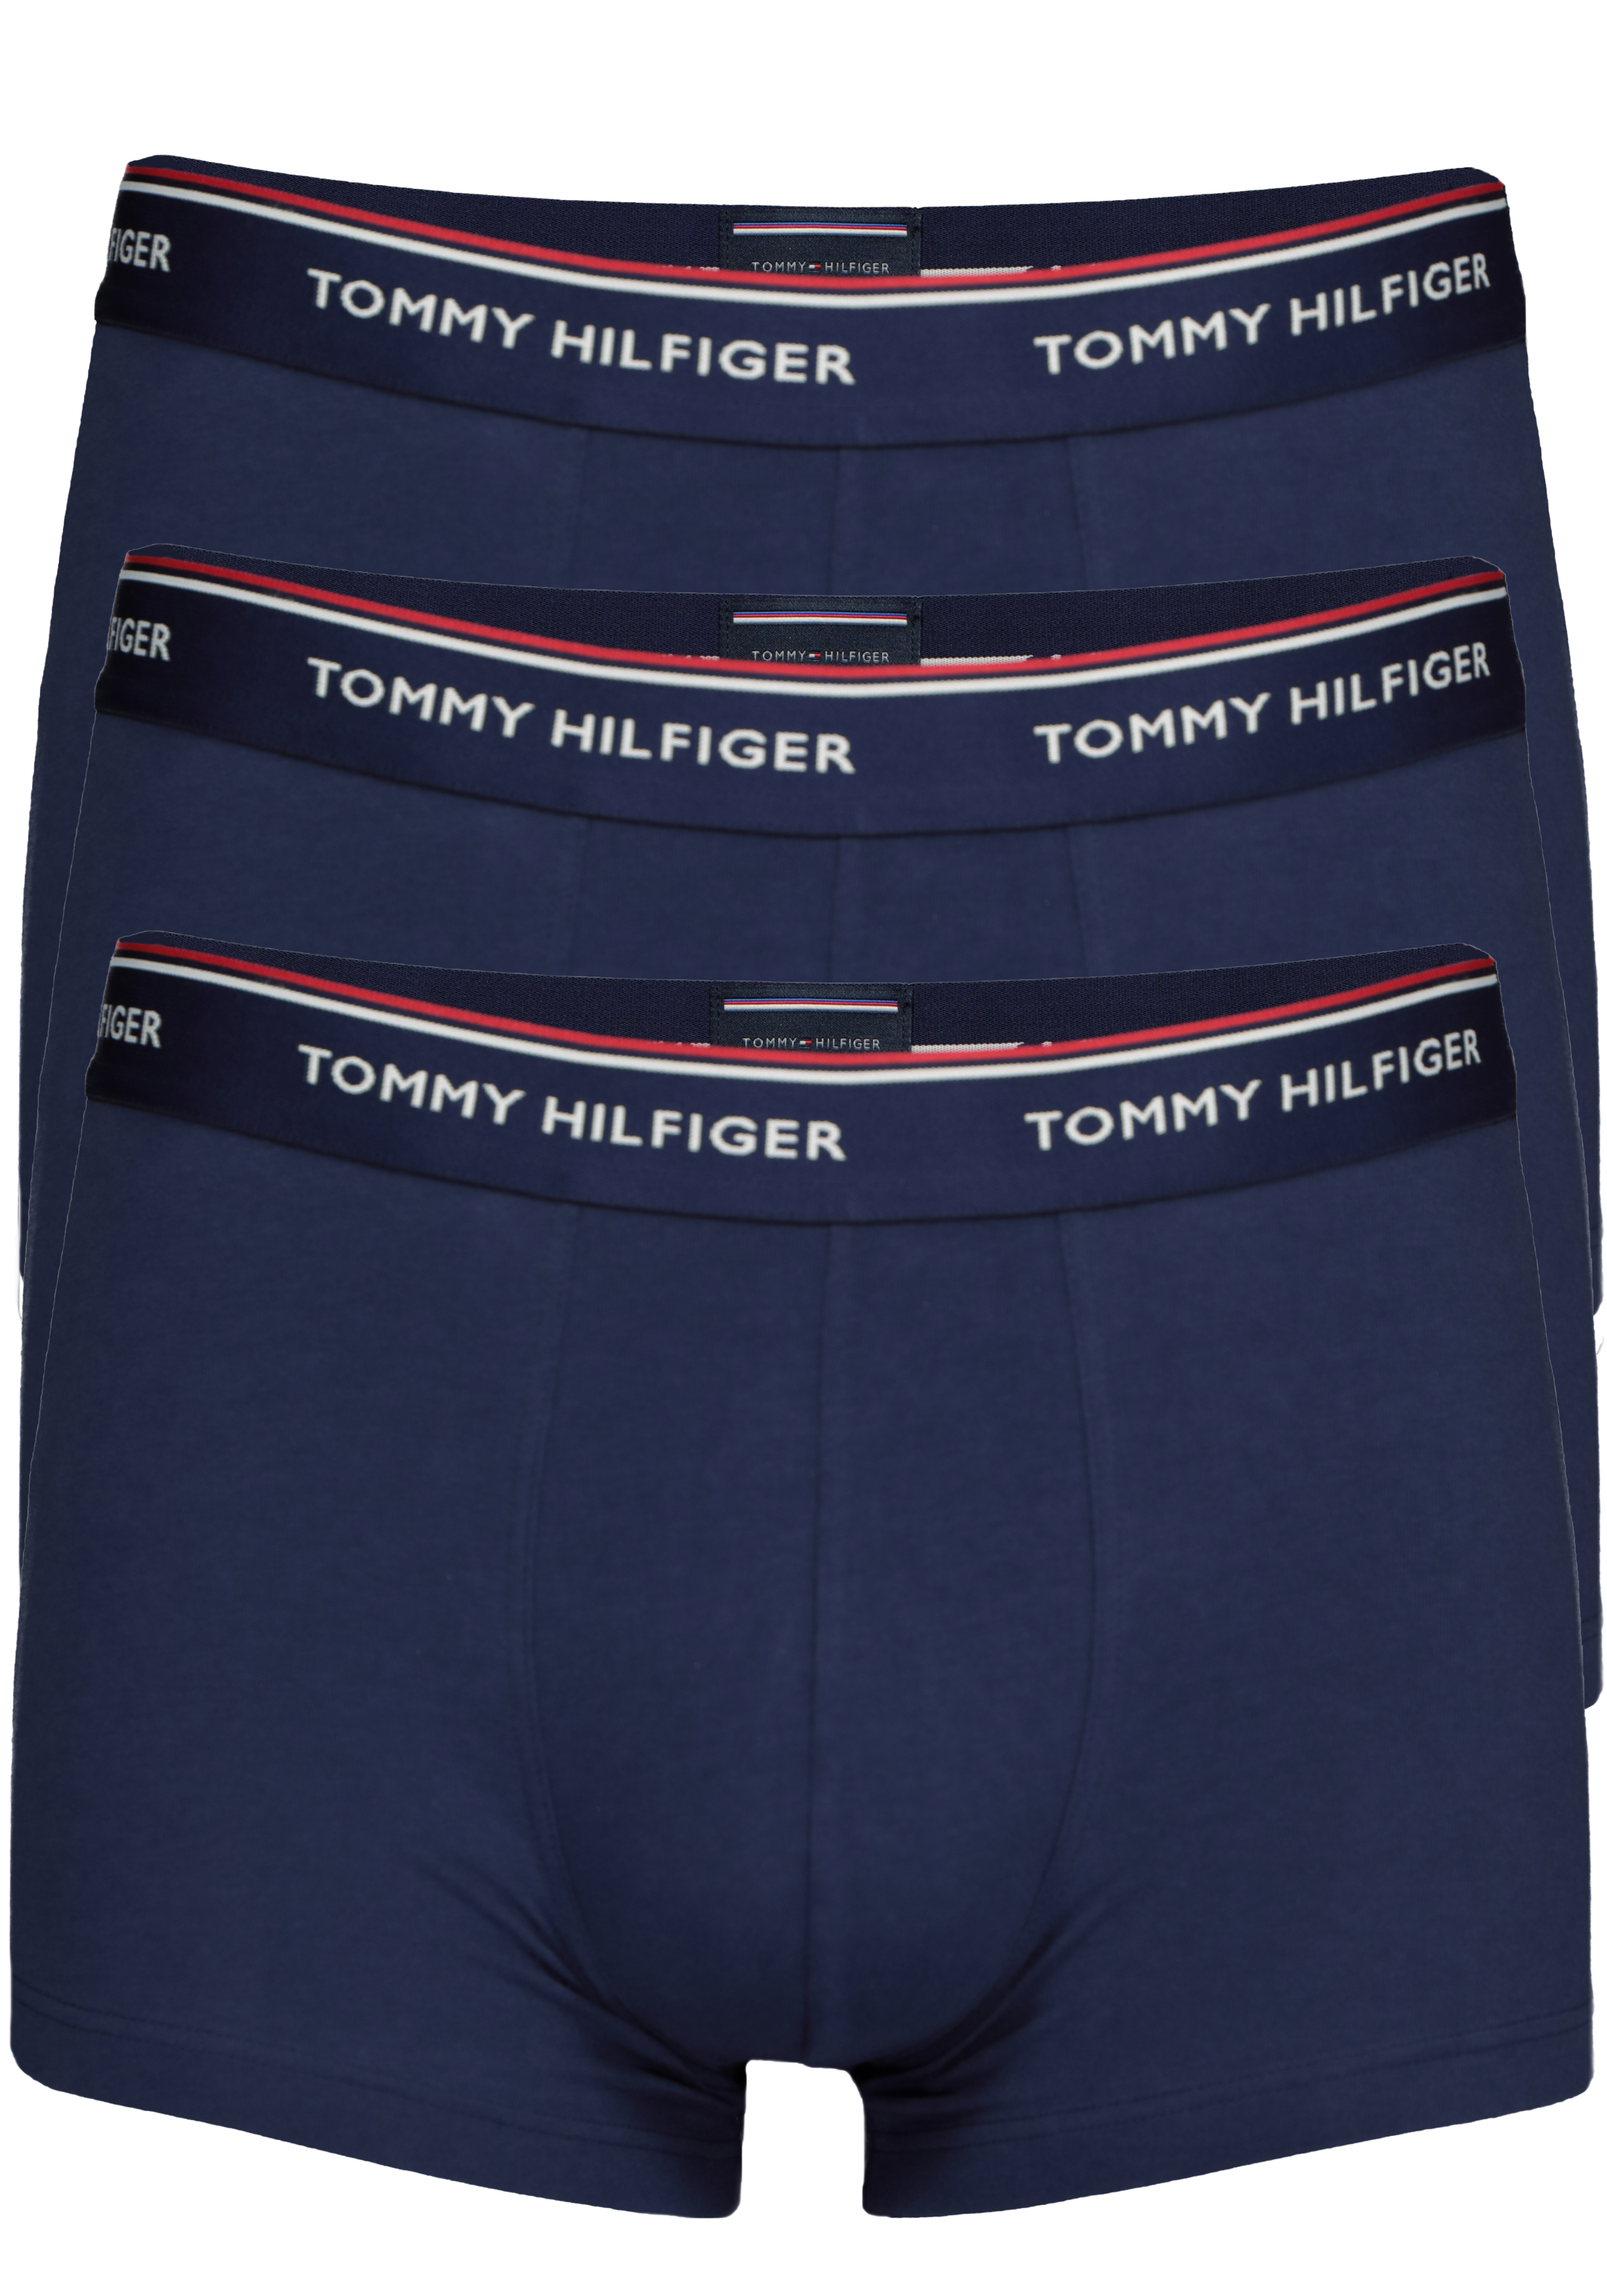 Tommy Hilfiger trunks (3-pack), heren boxers normale lengte, blauw